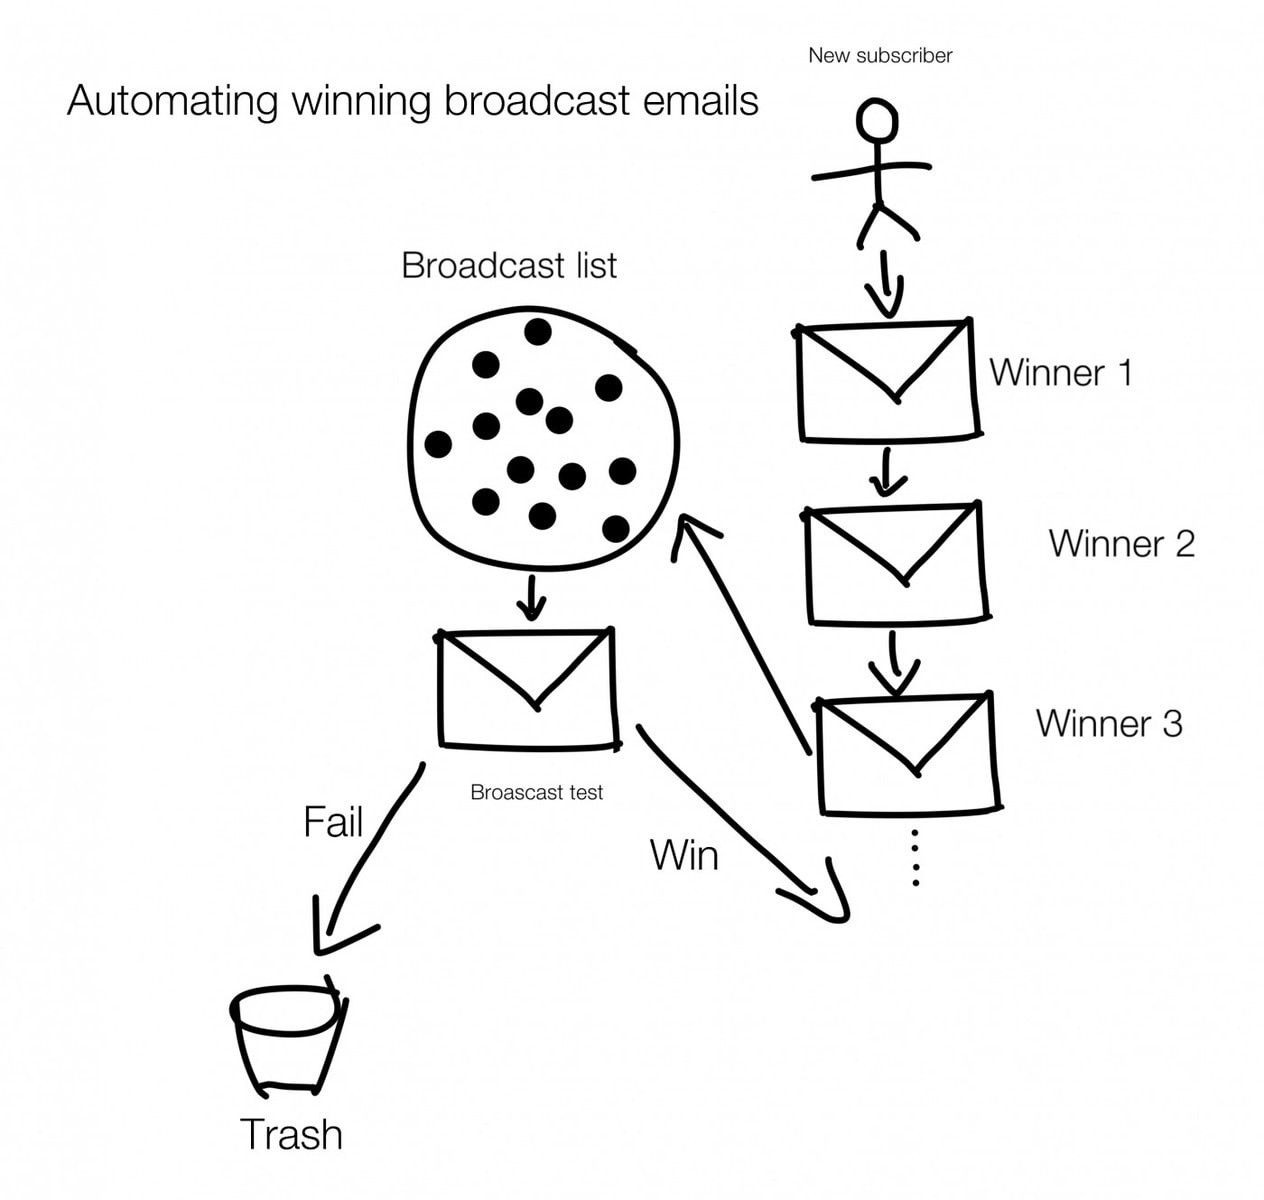 Automating winning broadcast emails